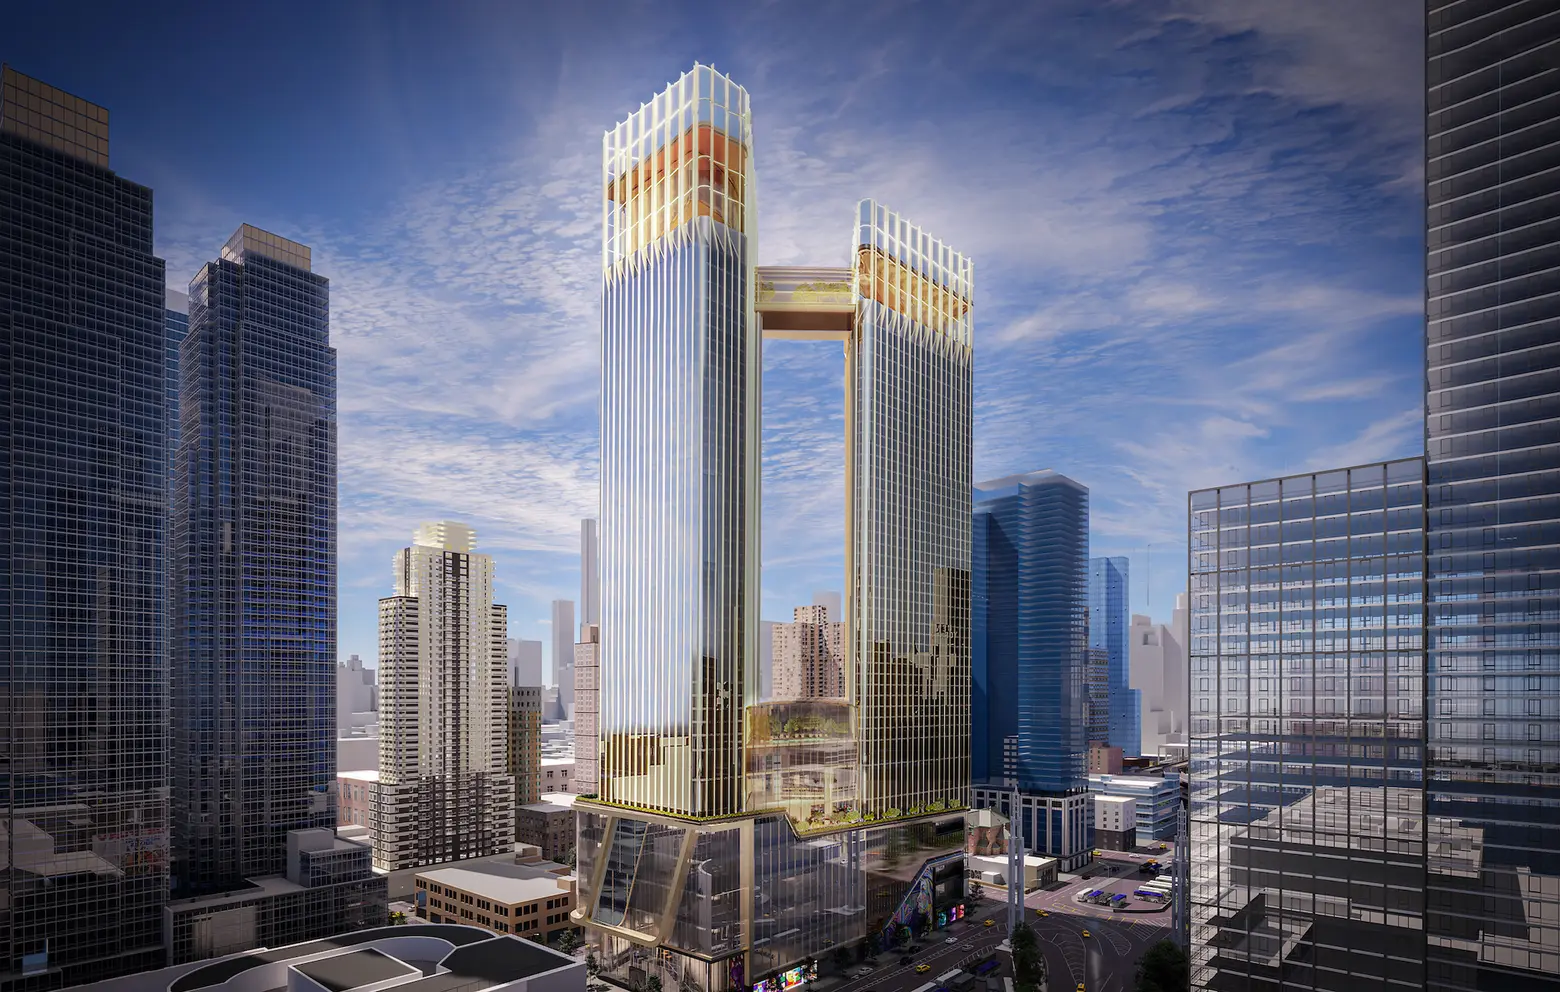 NYC’s latest casino bid calls for two 46-story skyscrapers across from the Javits Center